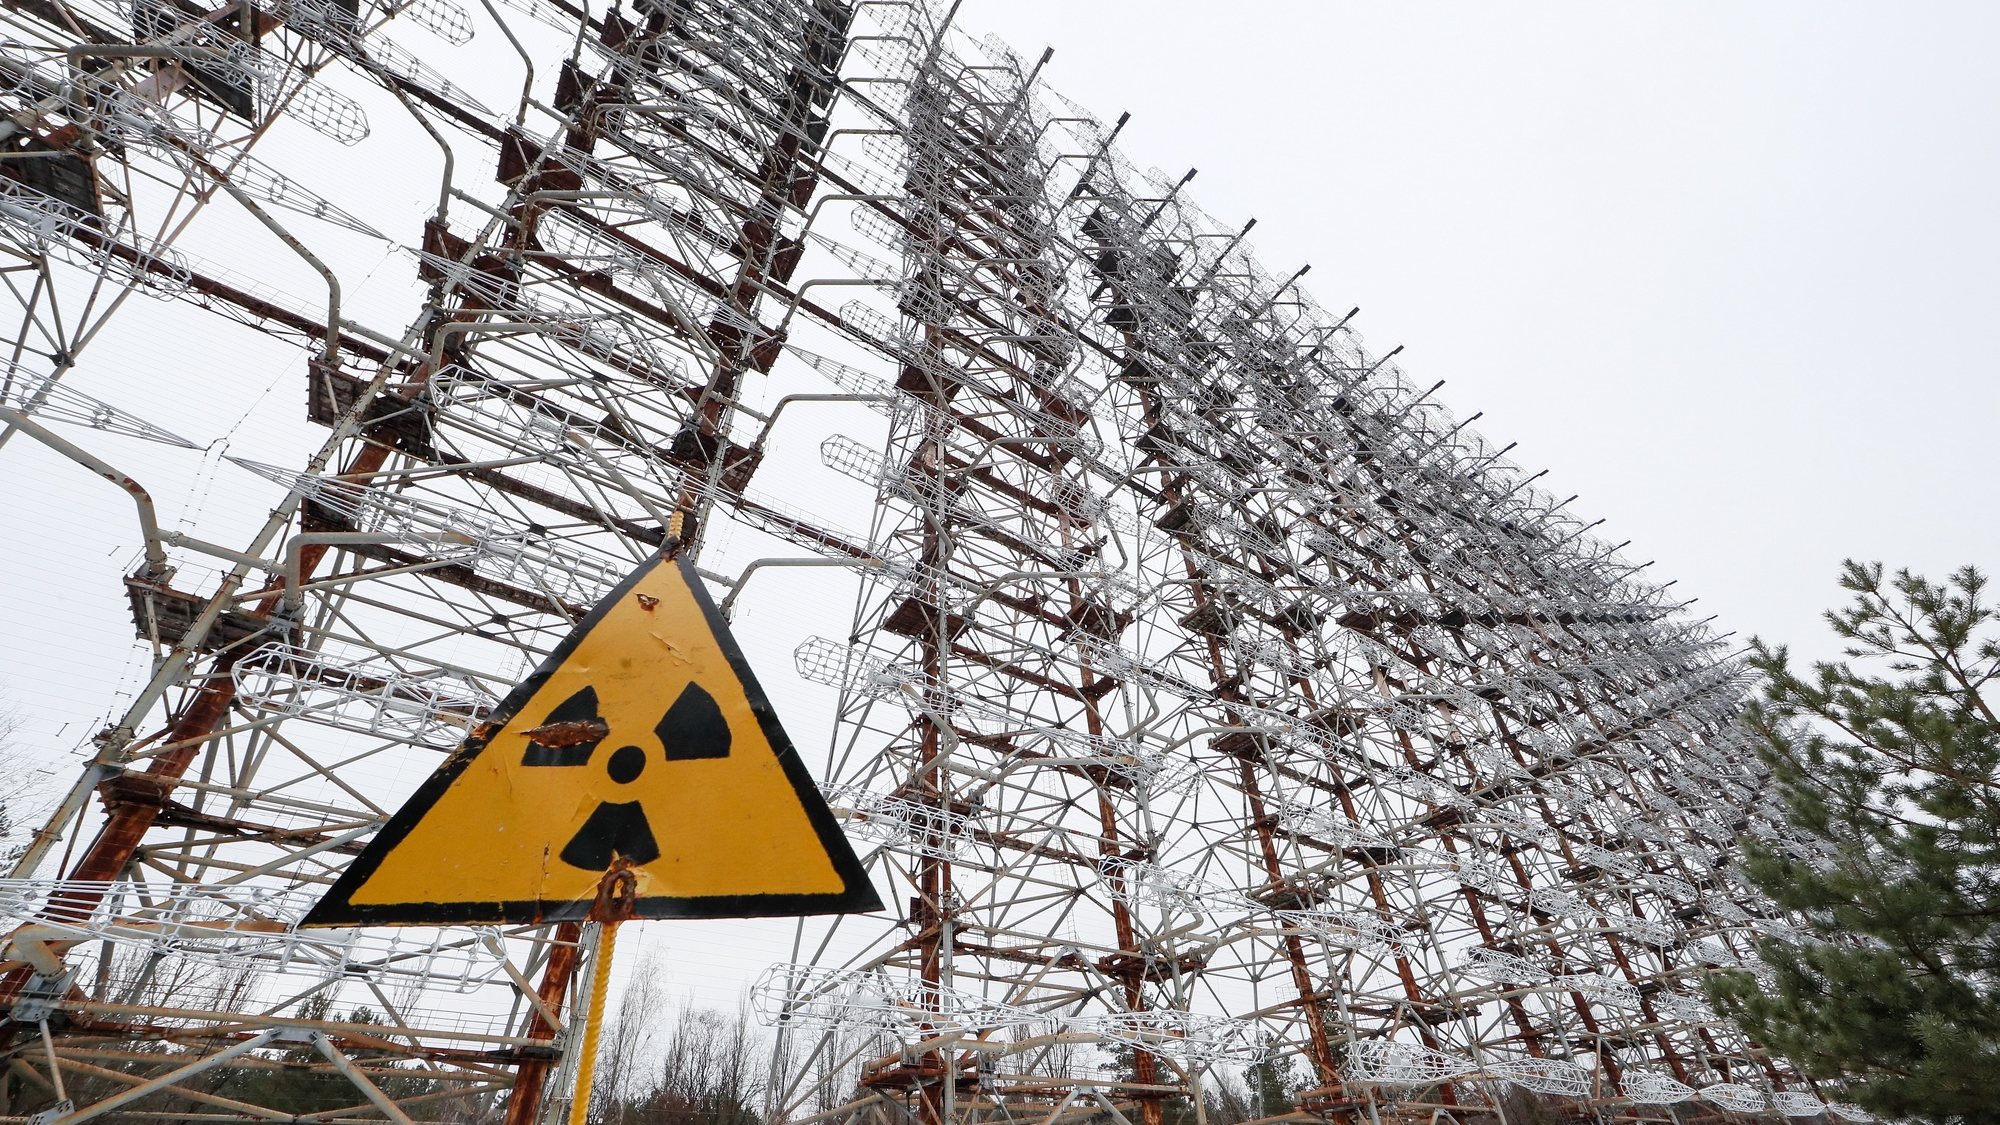 epa07183535 The general view of the remains of the over-the-horizon radar system &#039;Duga&#039; not far from city of Chernobyl, Ukraine, 22 November 2018. The over-the-horizon radar system Duga is placed not far of Chernobyl and was a part of the former Soviet Union missile defense radar network with early warning which operated to 26 April 1986 and stopped after the Chernobyl Nuclear Power Plant disaster. The explosion of Unit 4 of the Chernobyl nuclear power plant in the early hours of 26 April 1986 is still regarded as the biggest accident in the history of nuclear power generation.  EPA/SERGEY DOLZHENKO